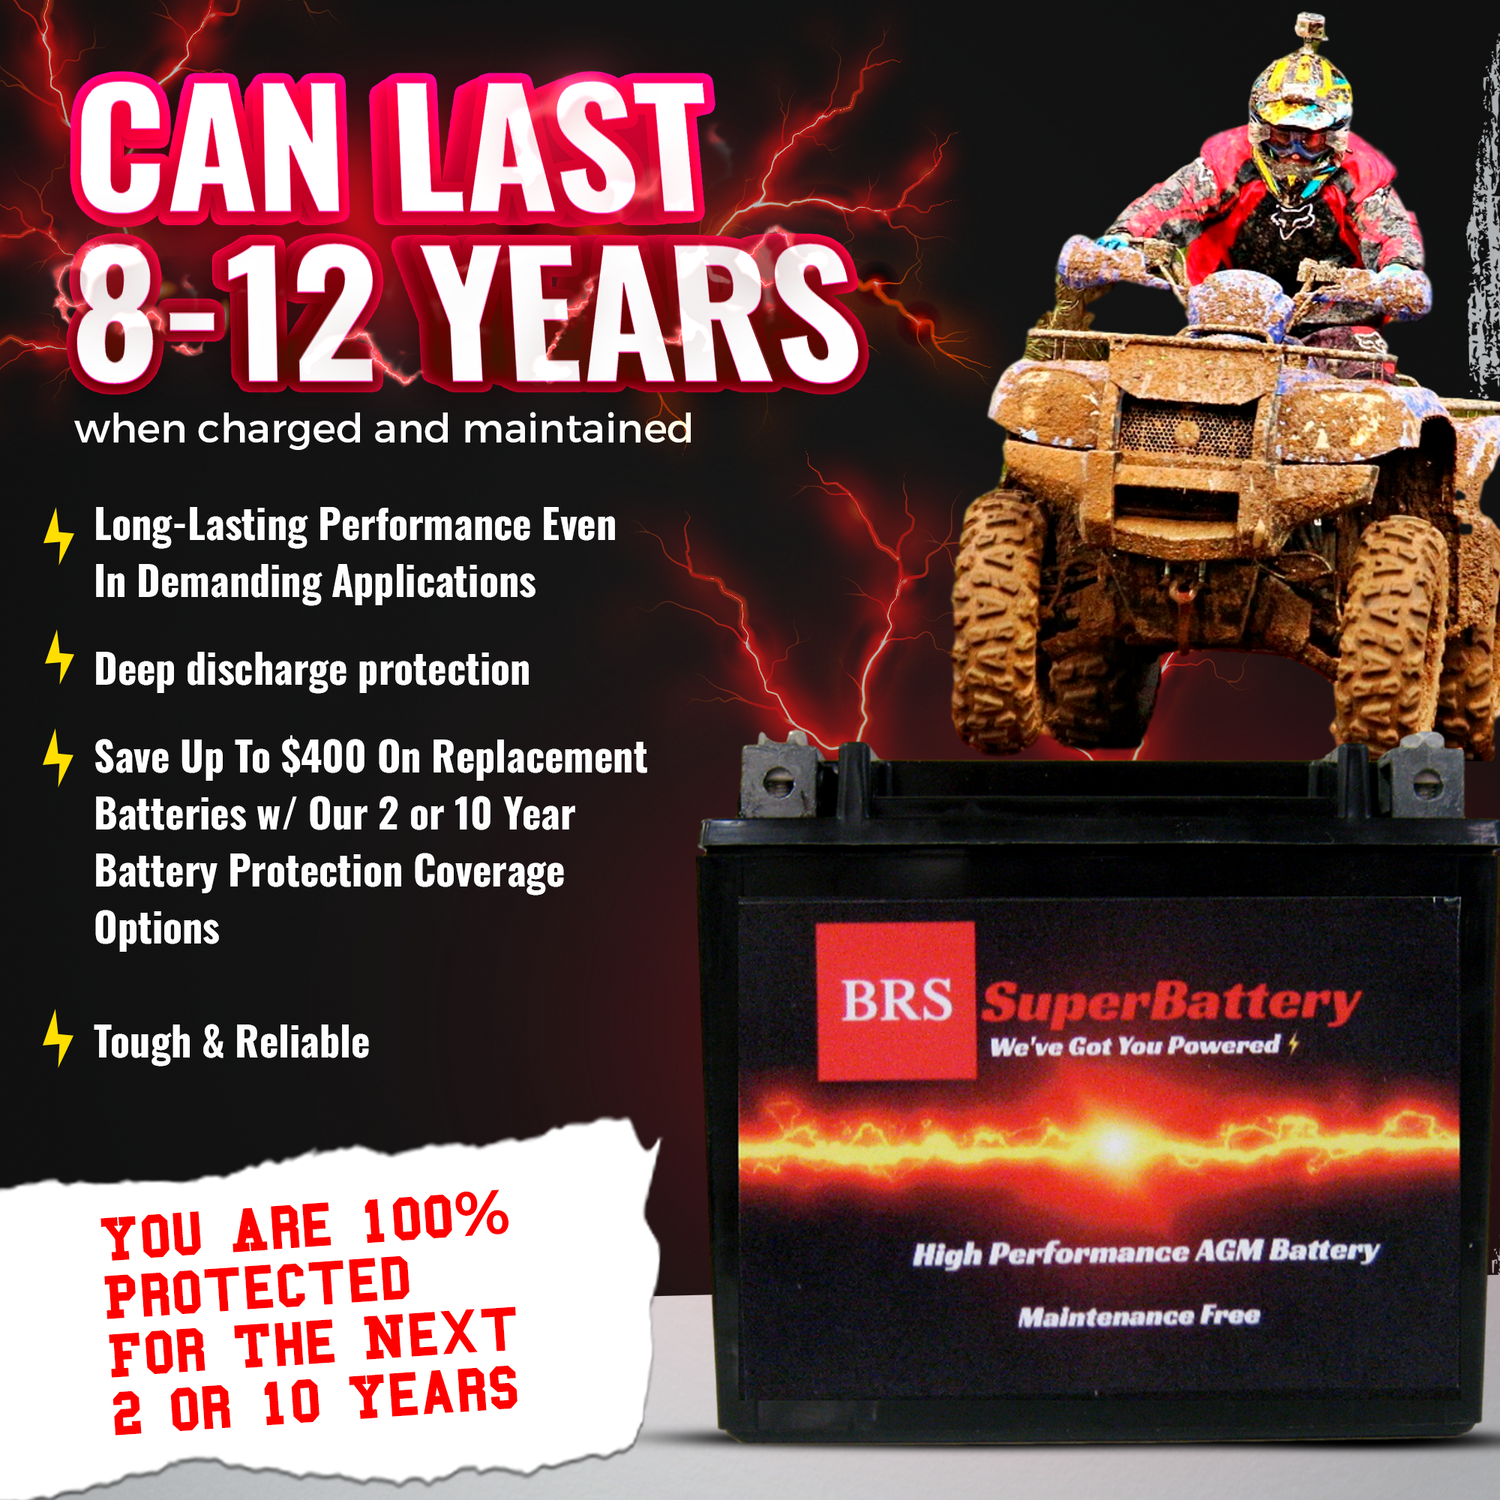 High Performance BRS4L-BS BS 10 Year Battery & Smart Charger / Maintainer Combo Bundle Kit 12v Sealed AGM PowerSports Battery - BRS Super Battery